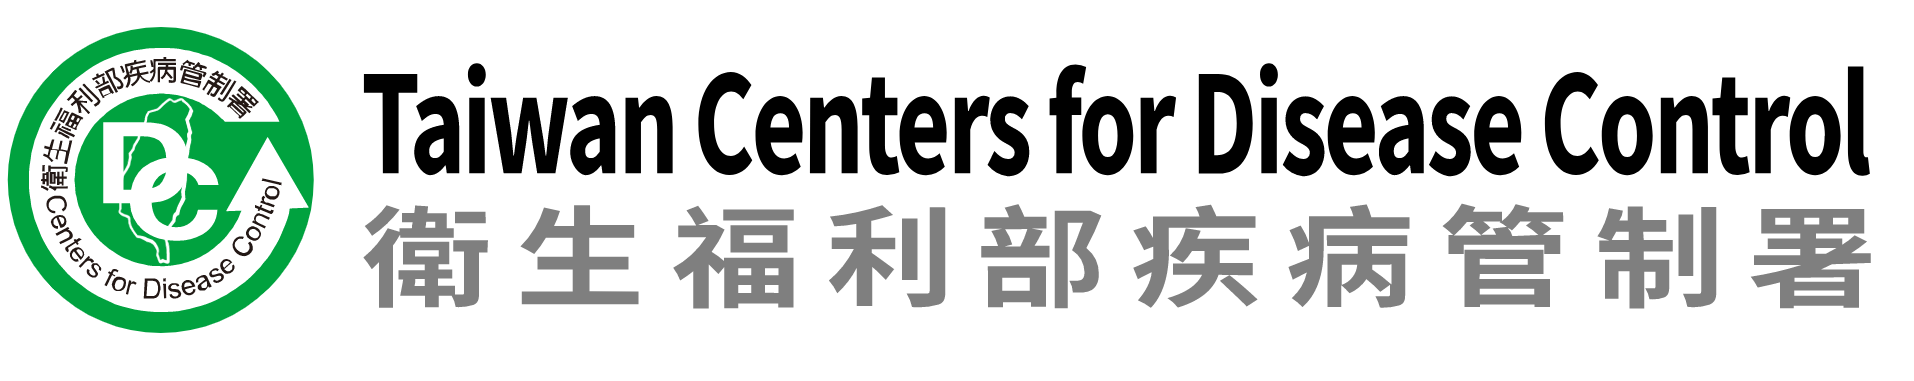 Taiwan Centers for Disease Control